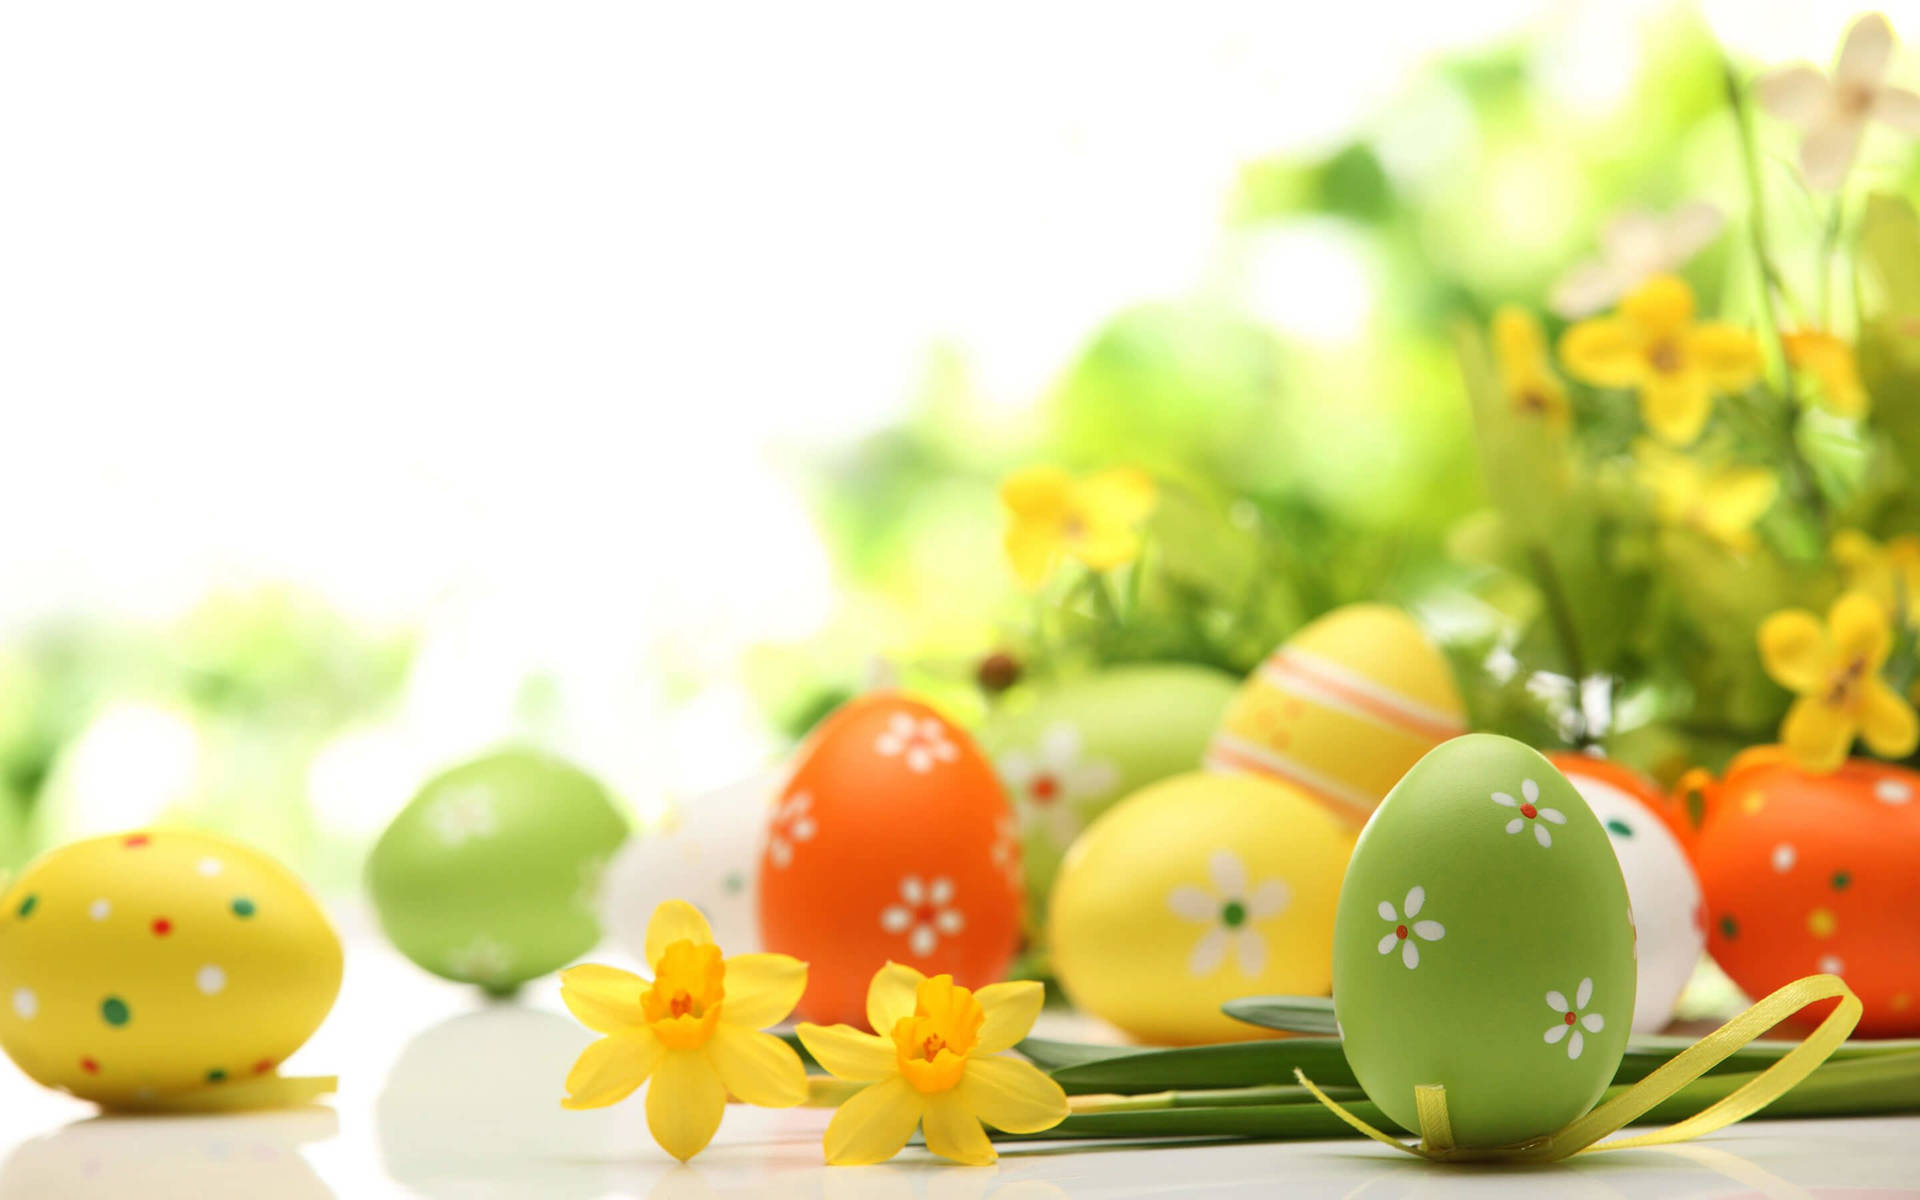 Happy Easter Assorted Eggs Floral Design Background